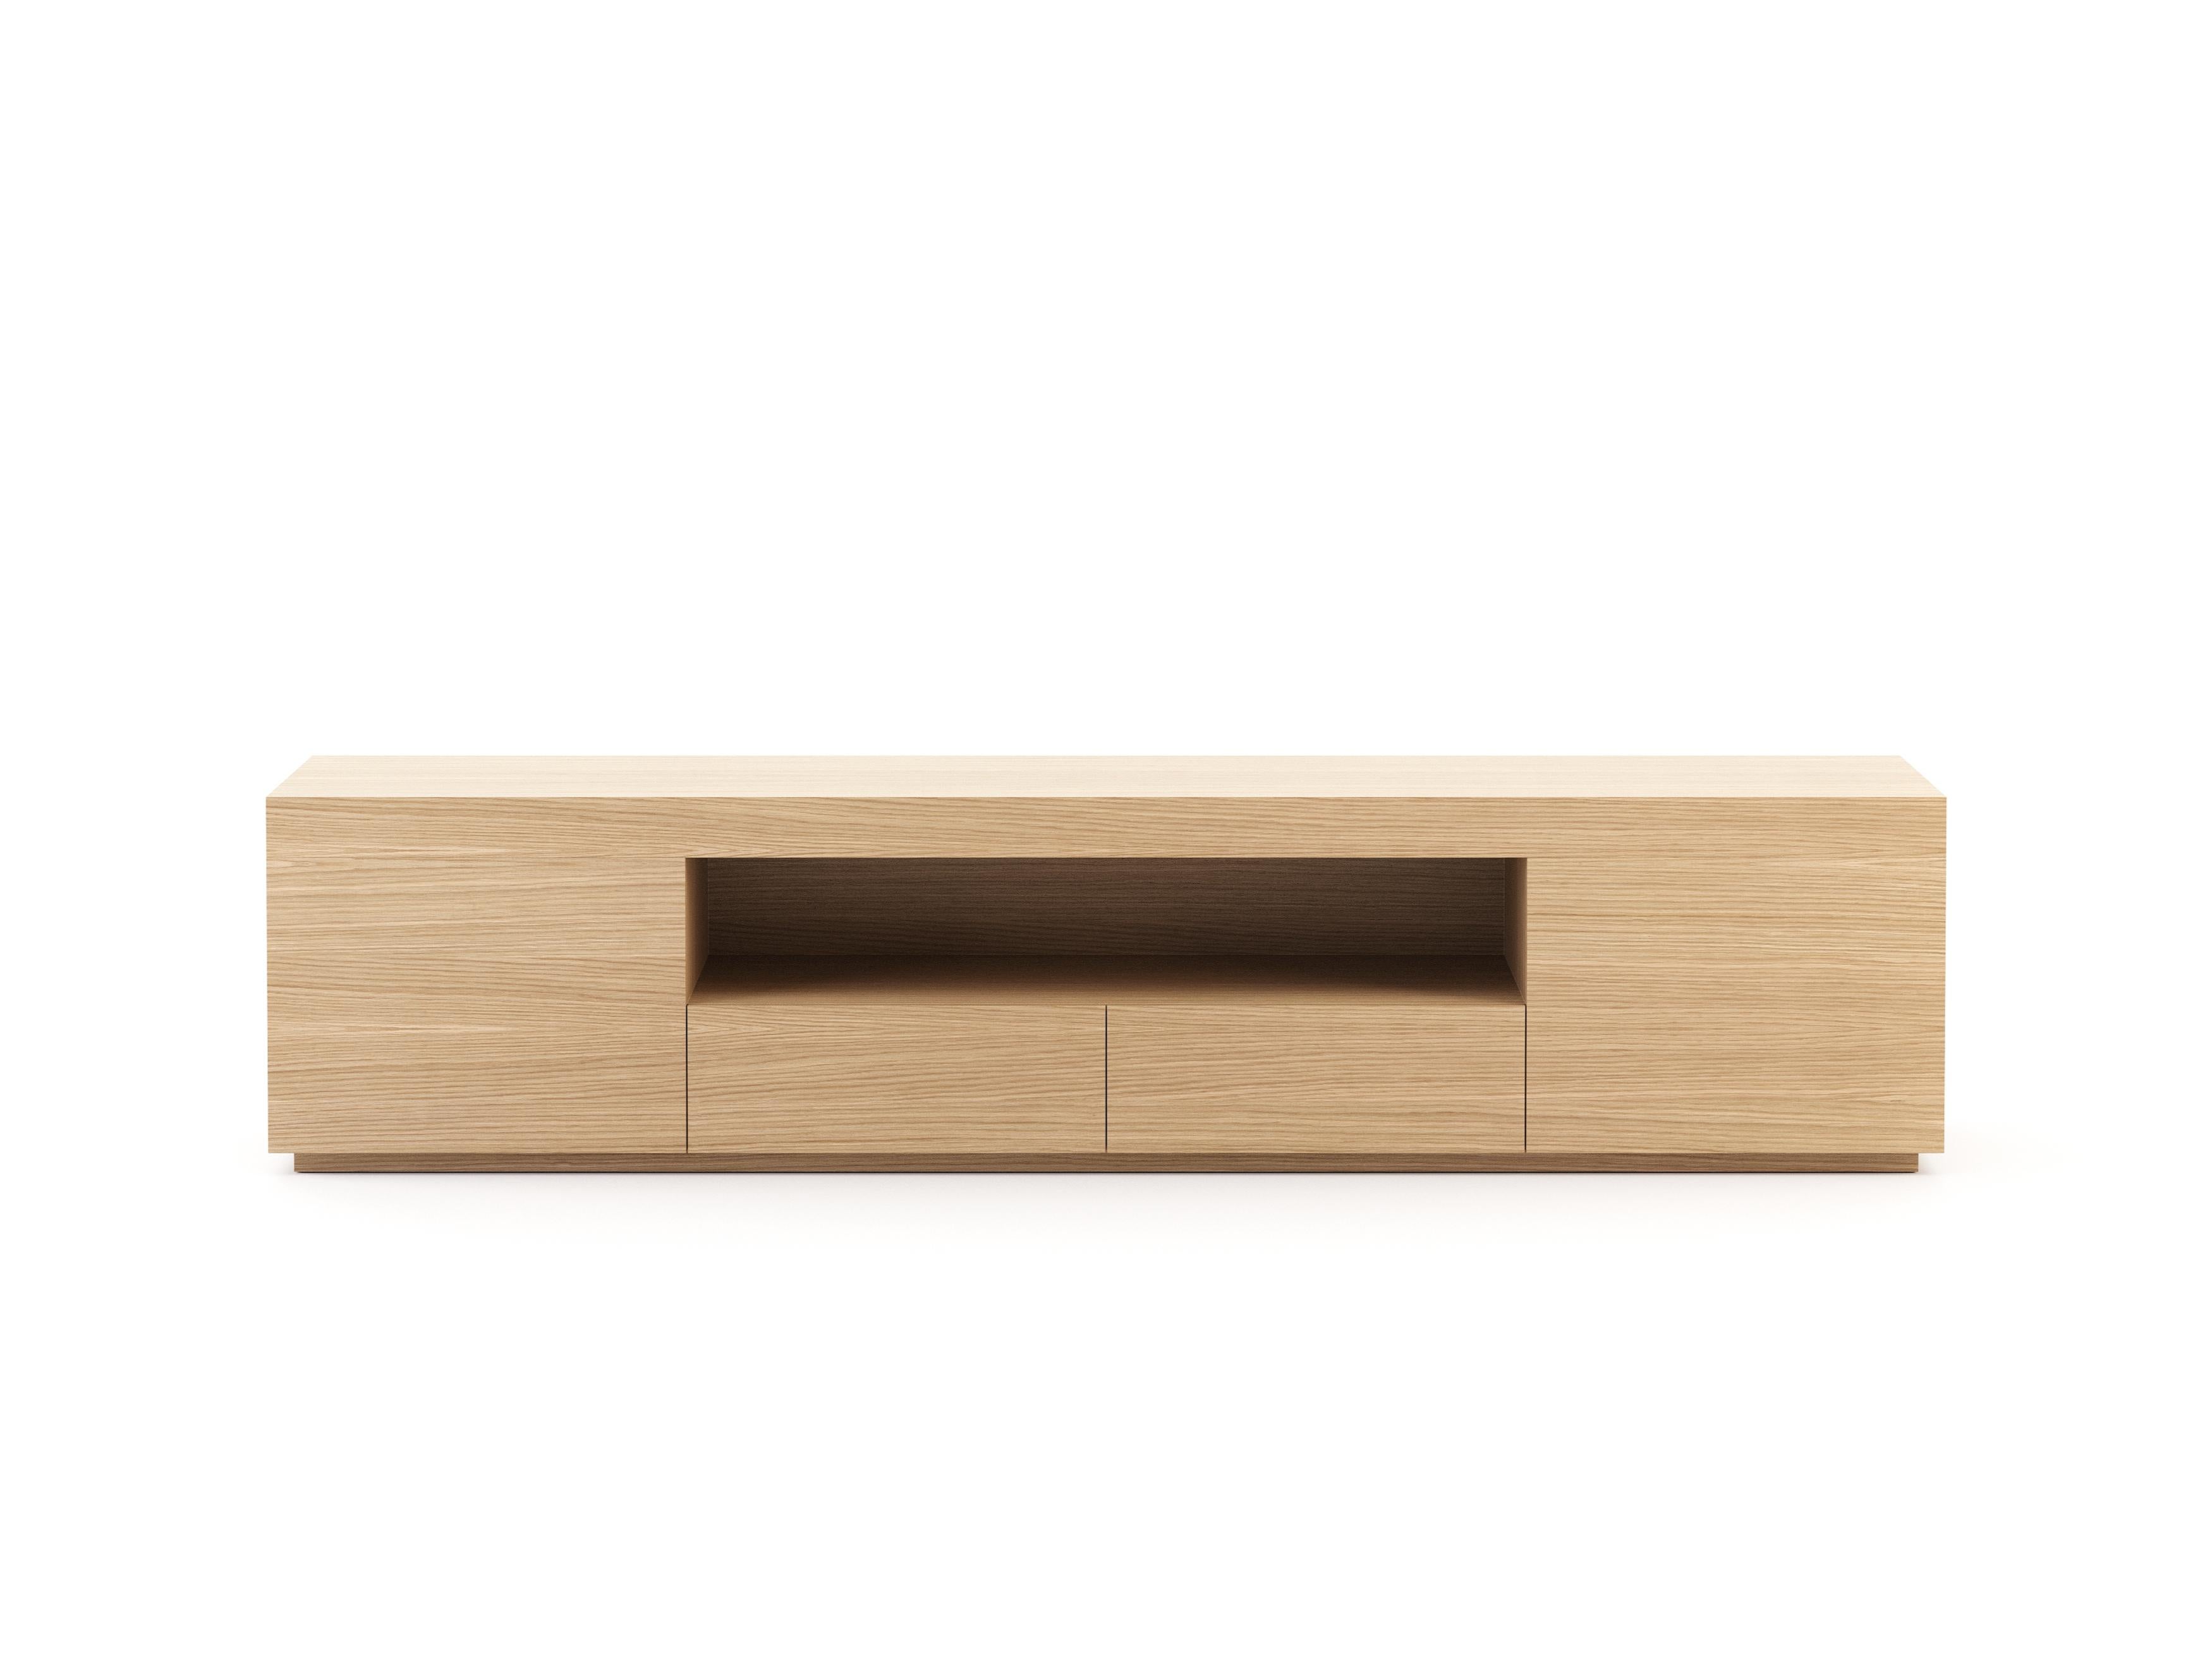 Hand-Crafted Modern Cascais Tv Cabinet made with Oak and lacquer, Handmade by Stylish Club For Sale